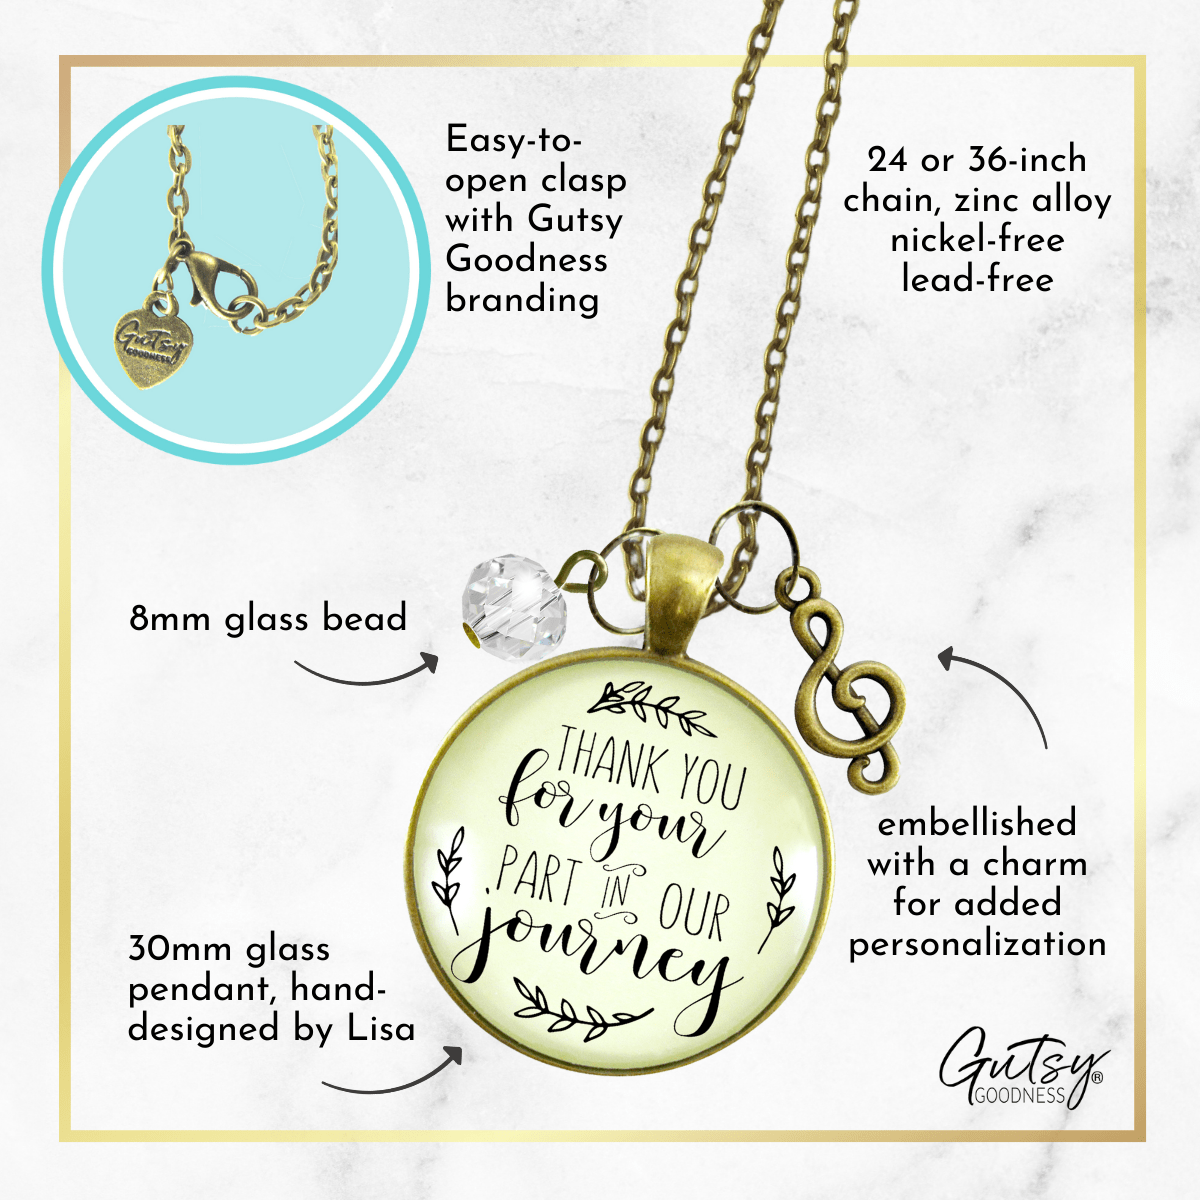 Gutsy Goodness Wedding Singer Gift Necklace Thank You for Part Musician Charm - Gutsy Goodness Handmade Jewelry;Wedding Singer Gift Necklace Thank You For Part Musician Charm - Gutsy Goodness Handmade Jewelry Gifts